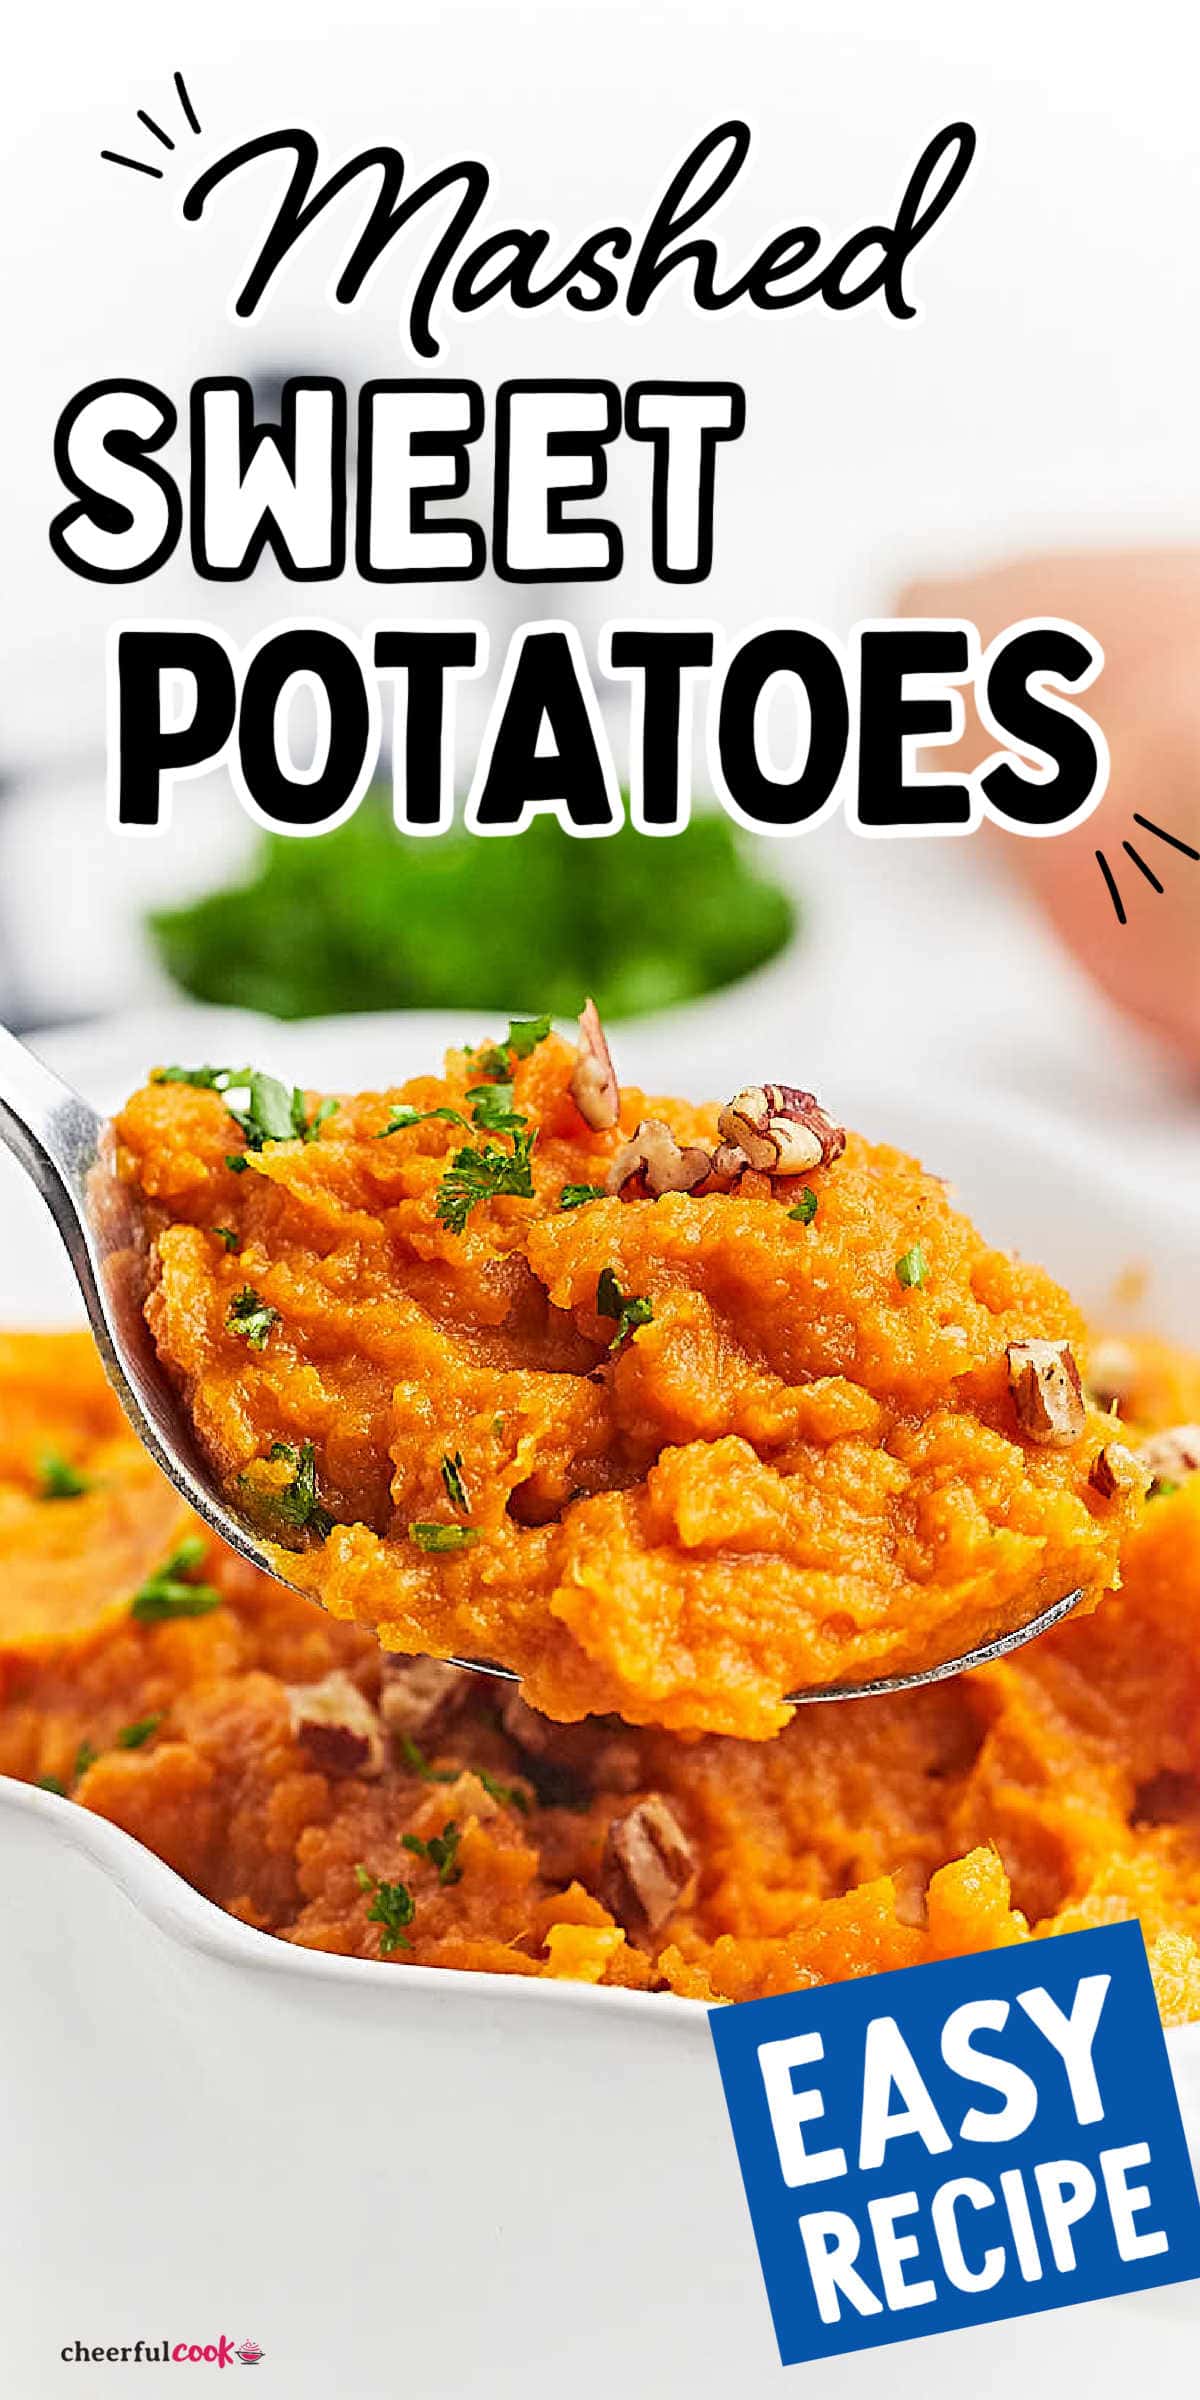 Wondering what side dish to make next? Try mashed sweet potatoes! They're creamy, a little sweet, and so easy to whip up. Perfect for weeknights or special occasions! #cheerfulcook #sweetpotatoes #sidedish #mashedsweetpotatoes #recipe #easyrecipes #thanksgiving ♡ cheerfulcook.com via @cheerfulcook